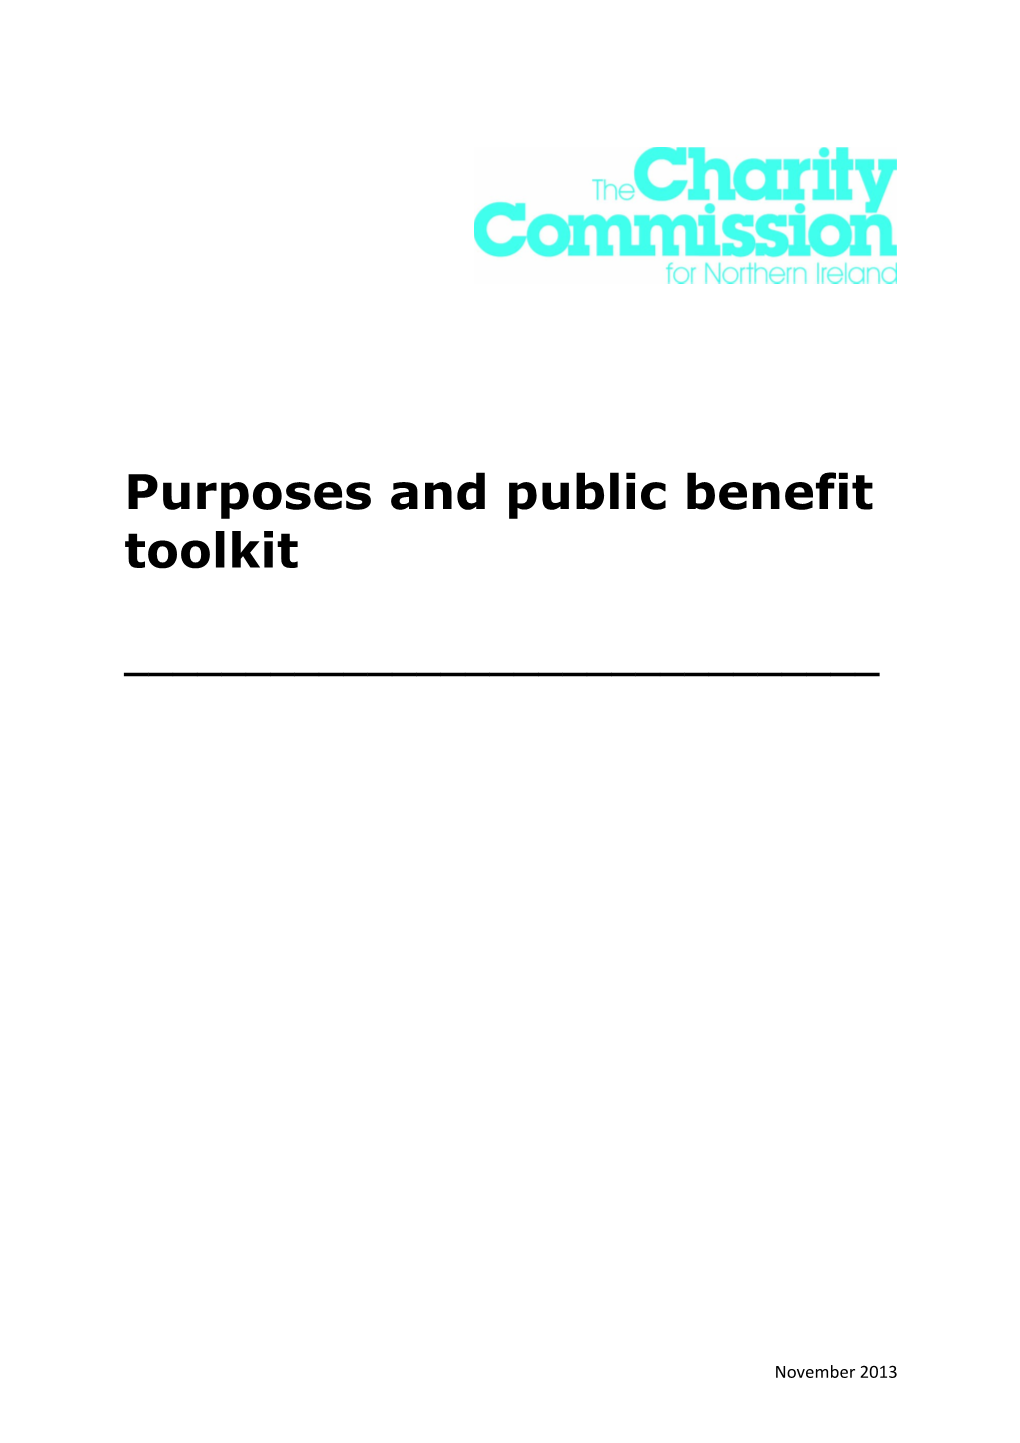 Purposes and Public Benefit Toolkit